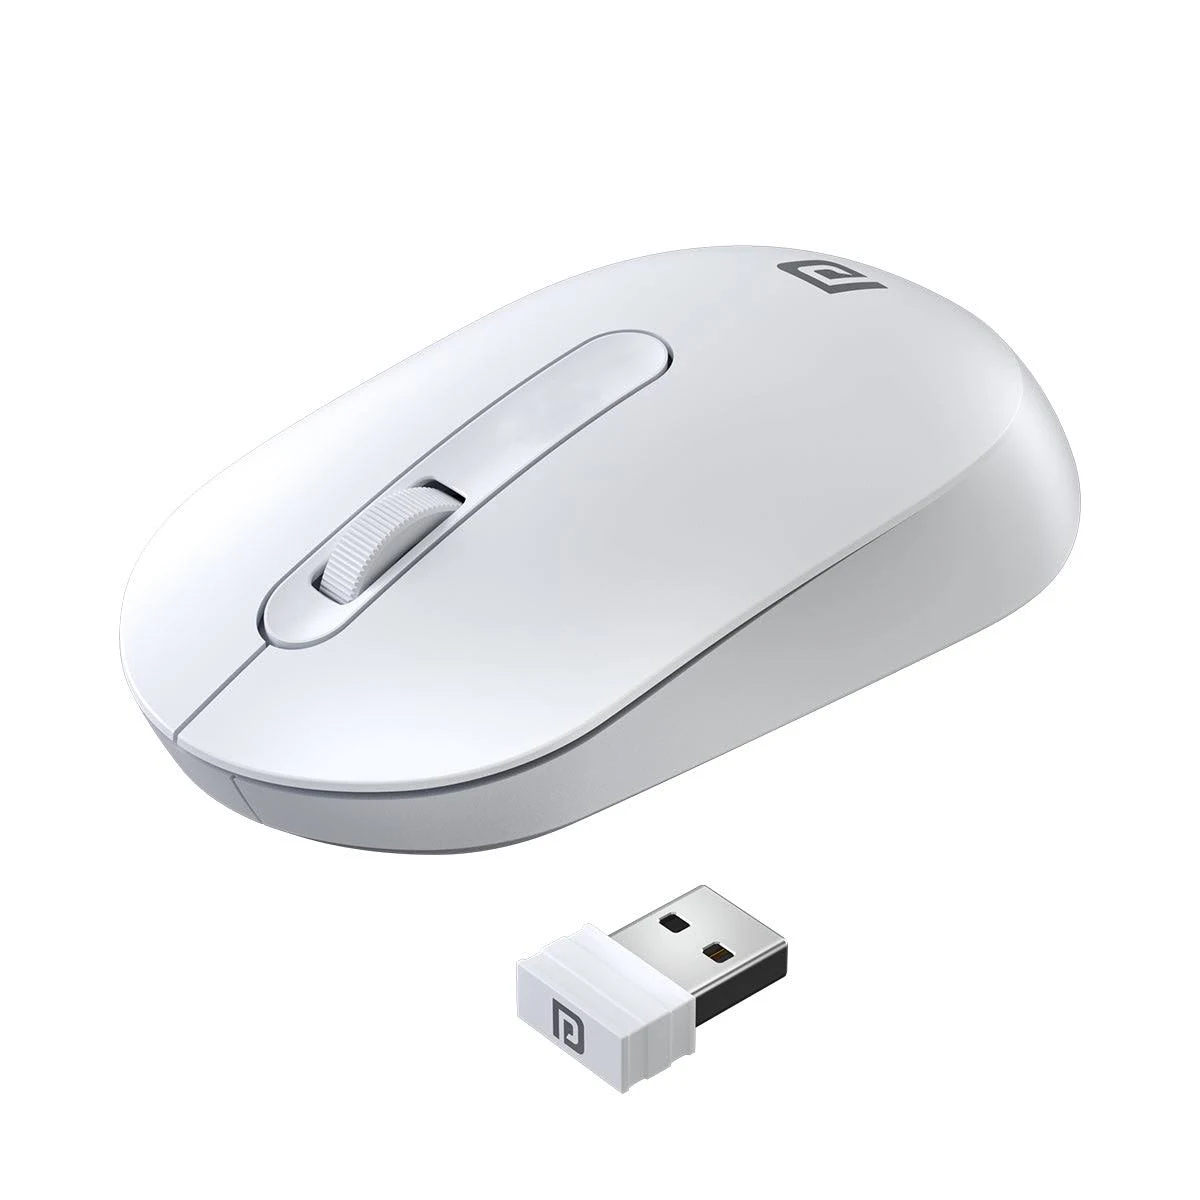 Portronics Toad 13 - Wireless Optical Mouse